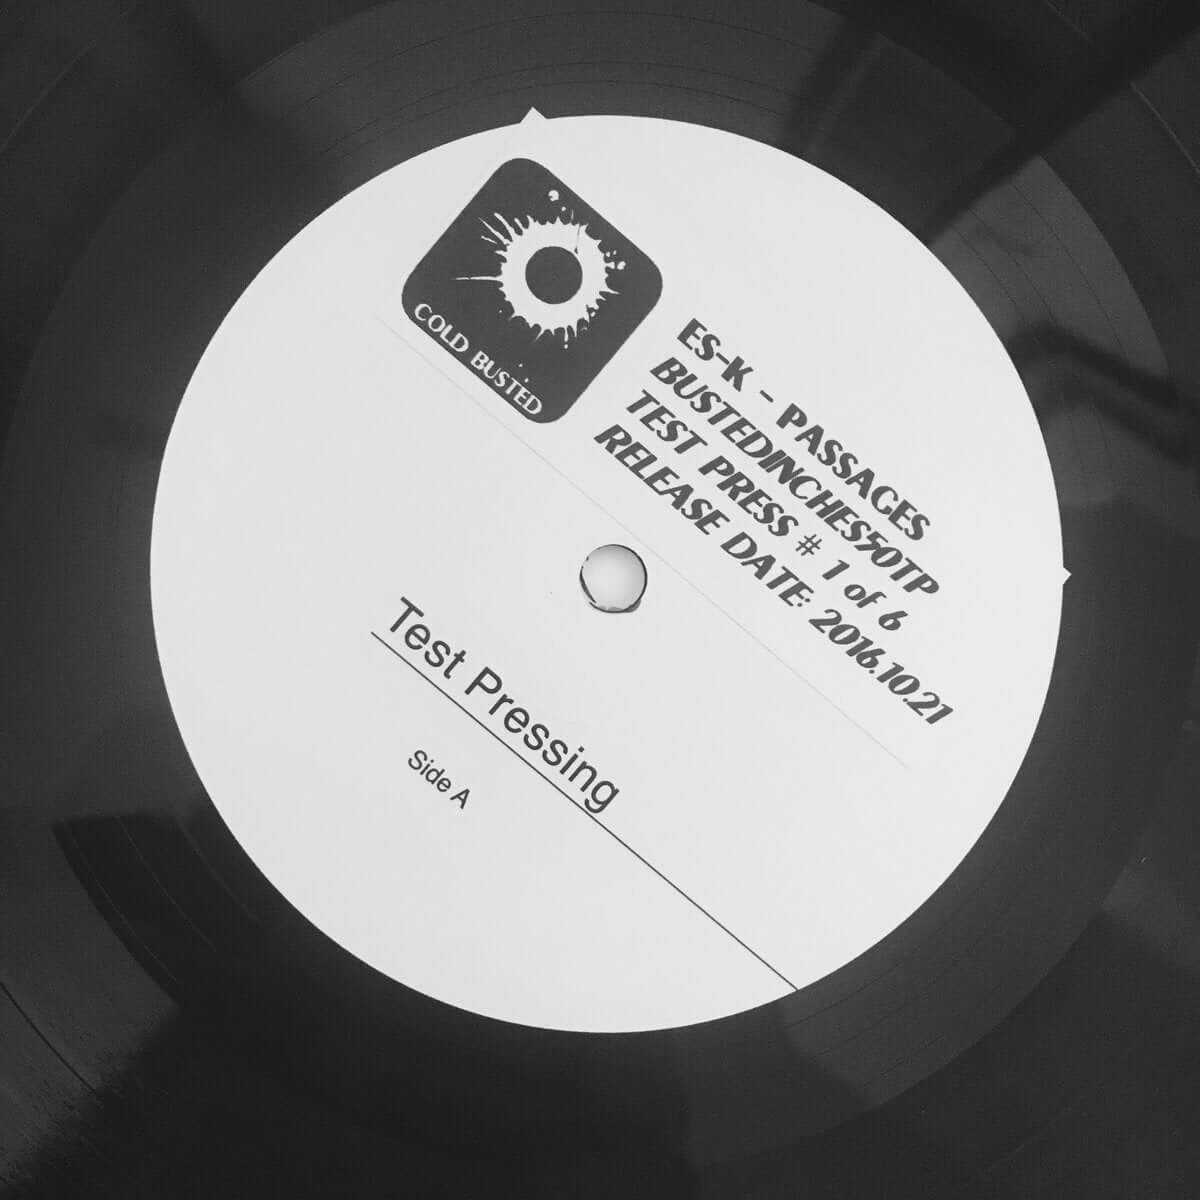 Es-K - Passages - Passages (Test Pressing) - Cold Busted